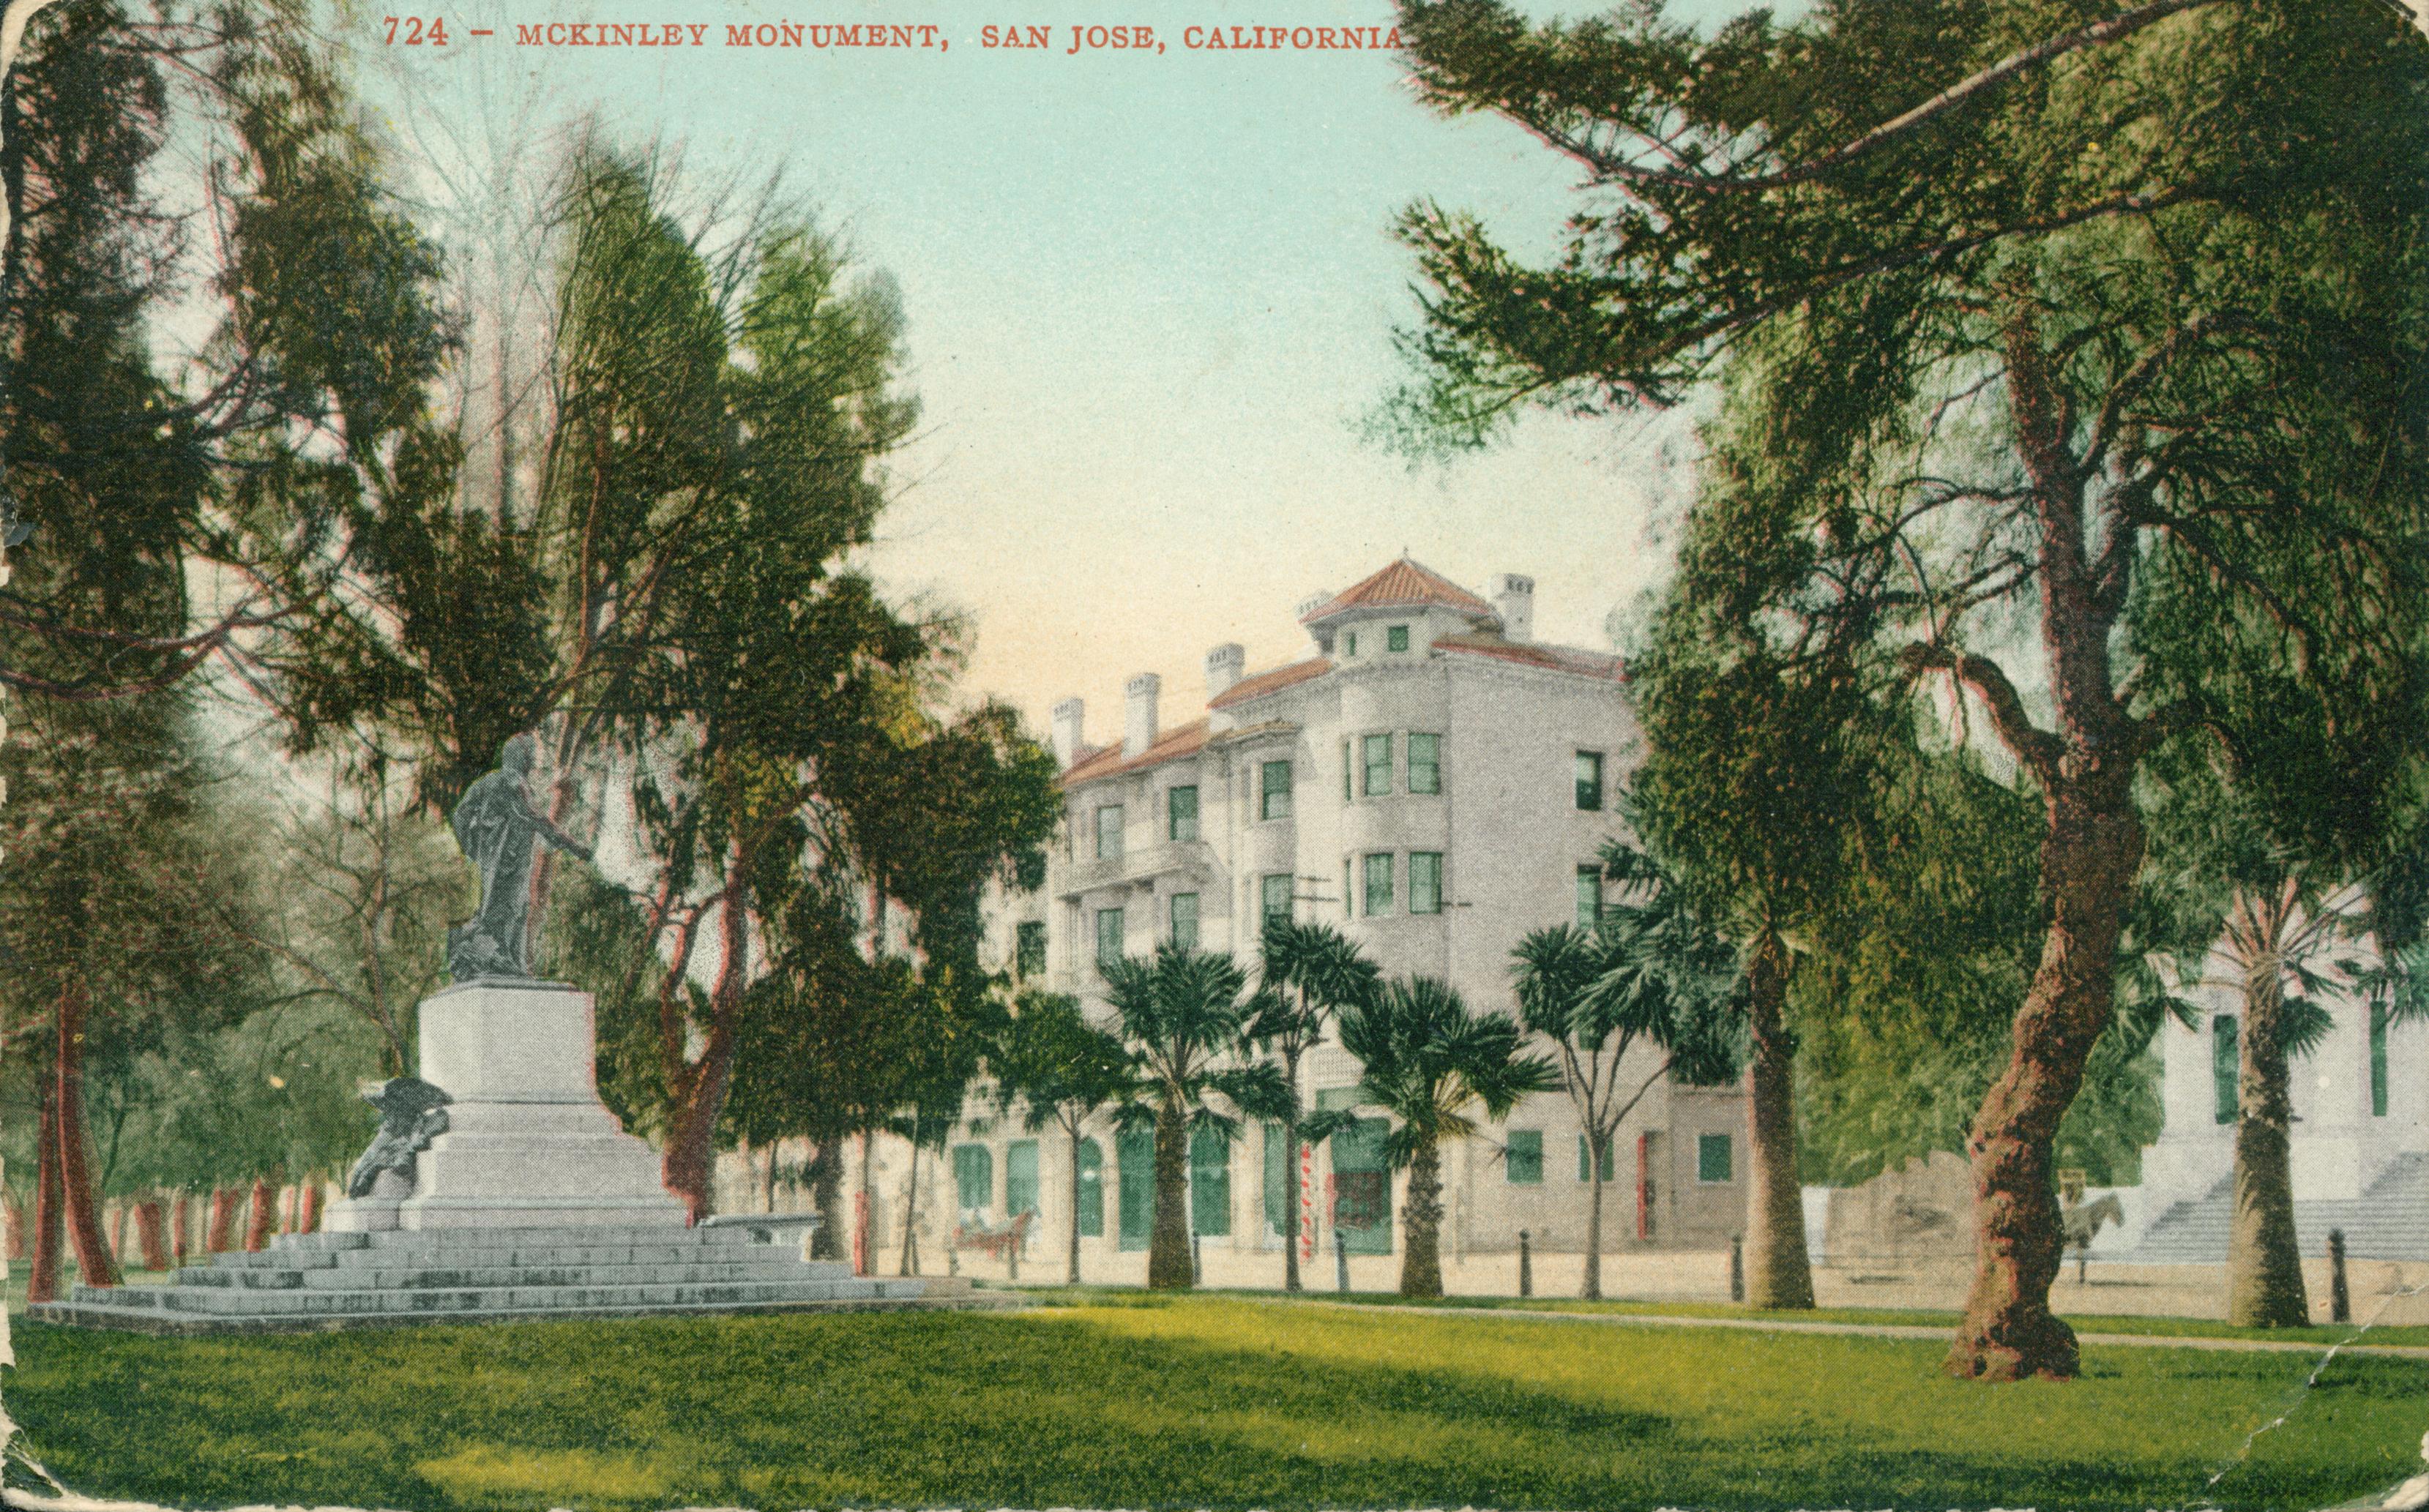 McKinley Monument, San Jose, California, park with buildings and trees